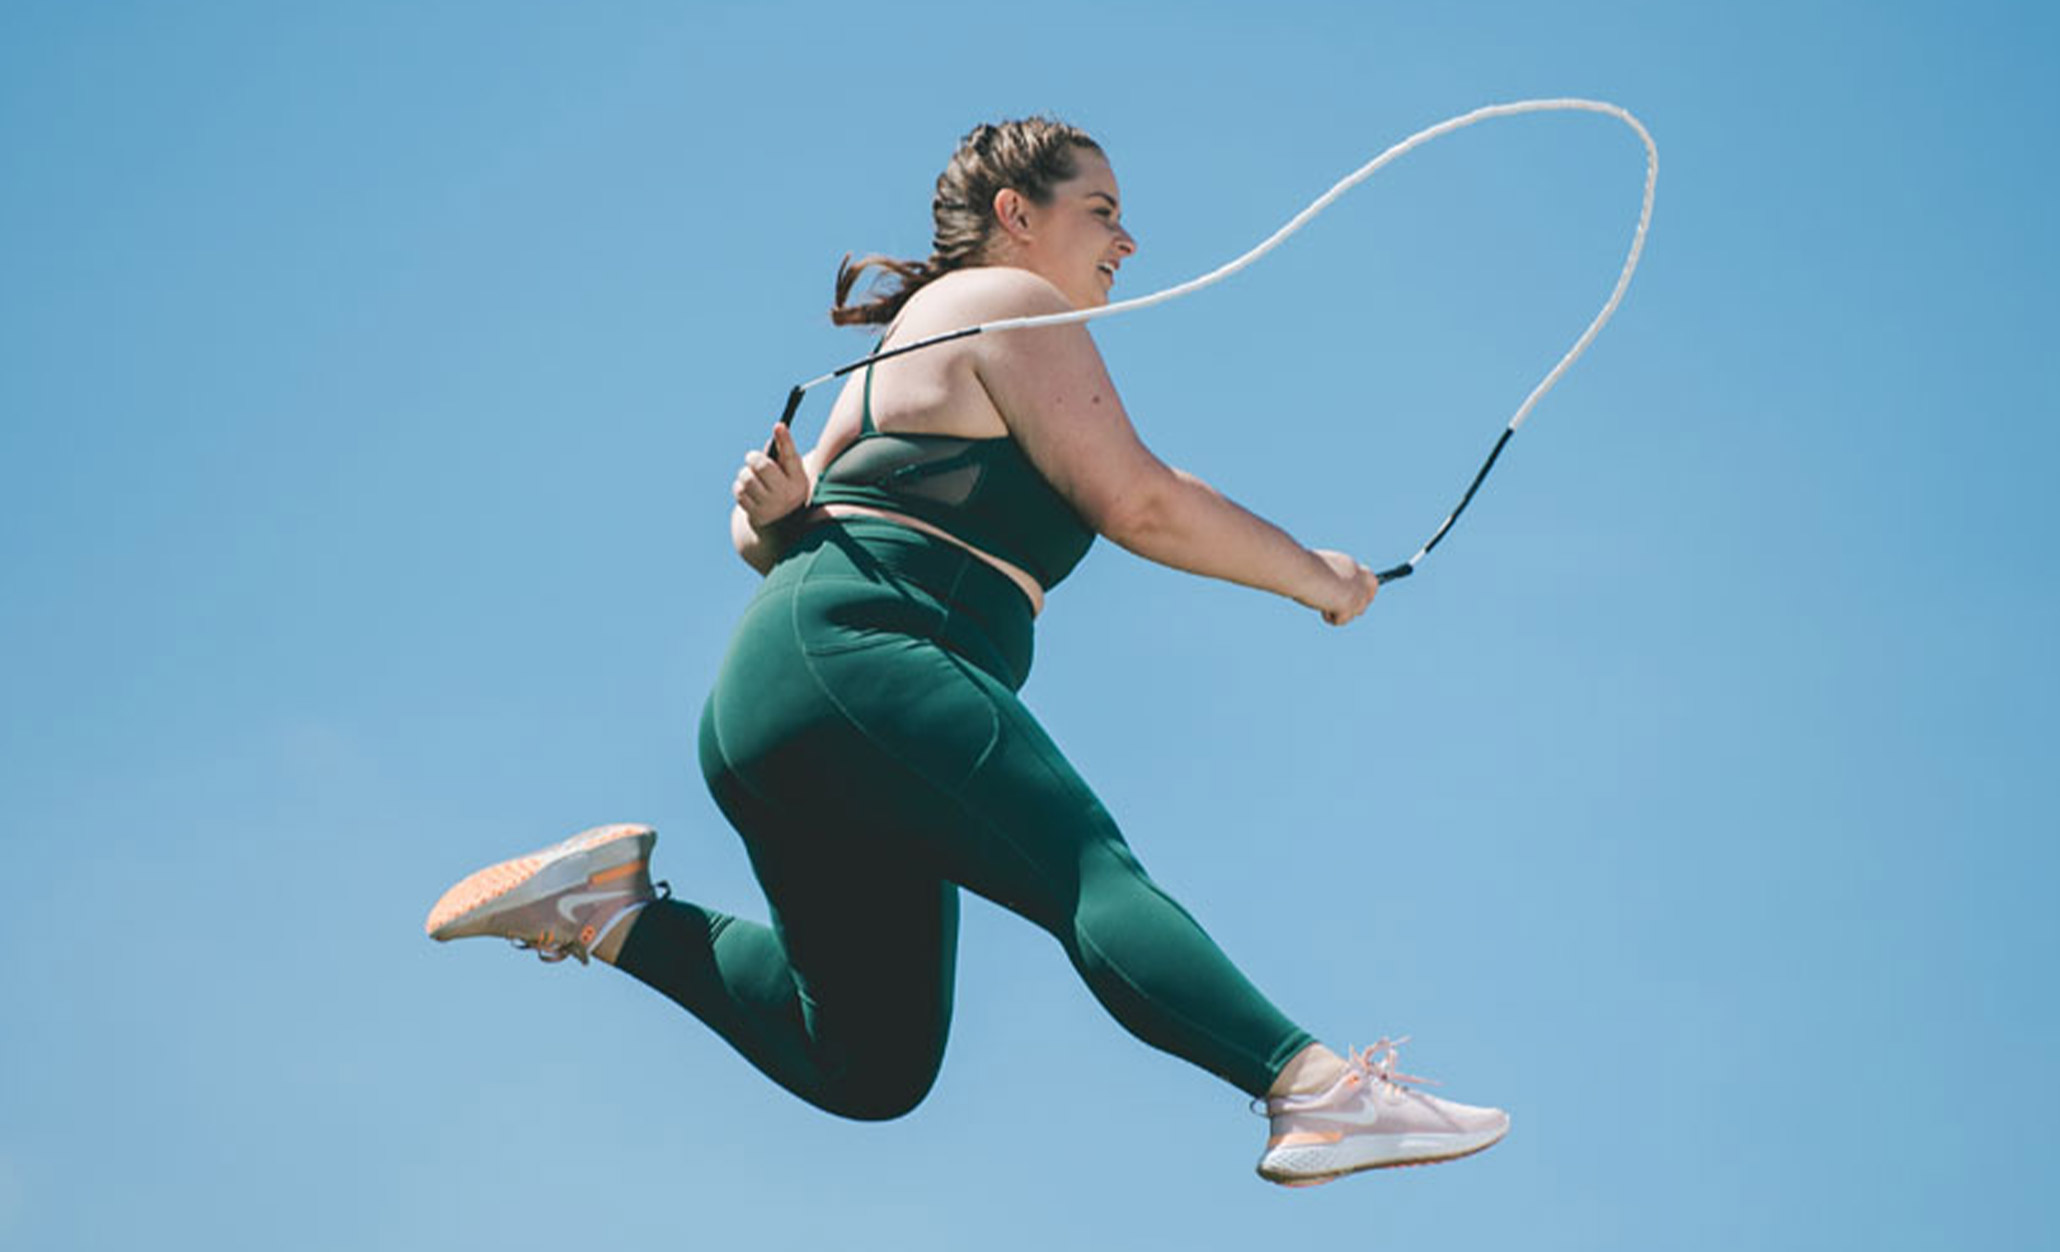 Jumping Jacks vs Jump Rope: Which is Better? - Inspire US